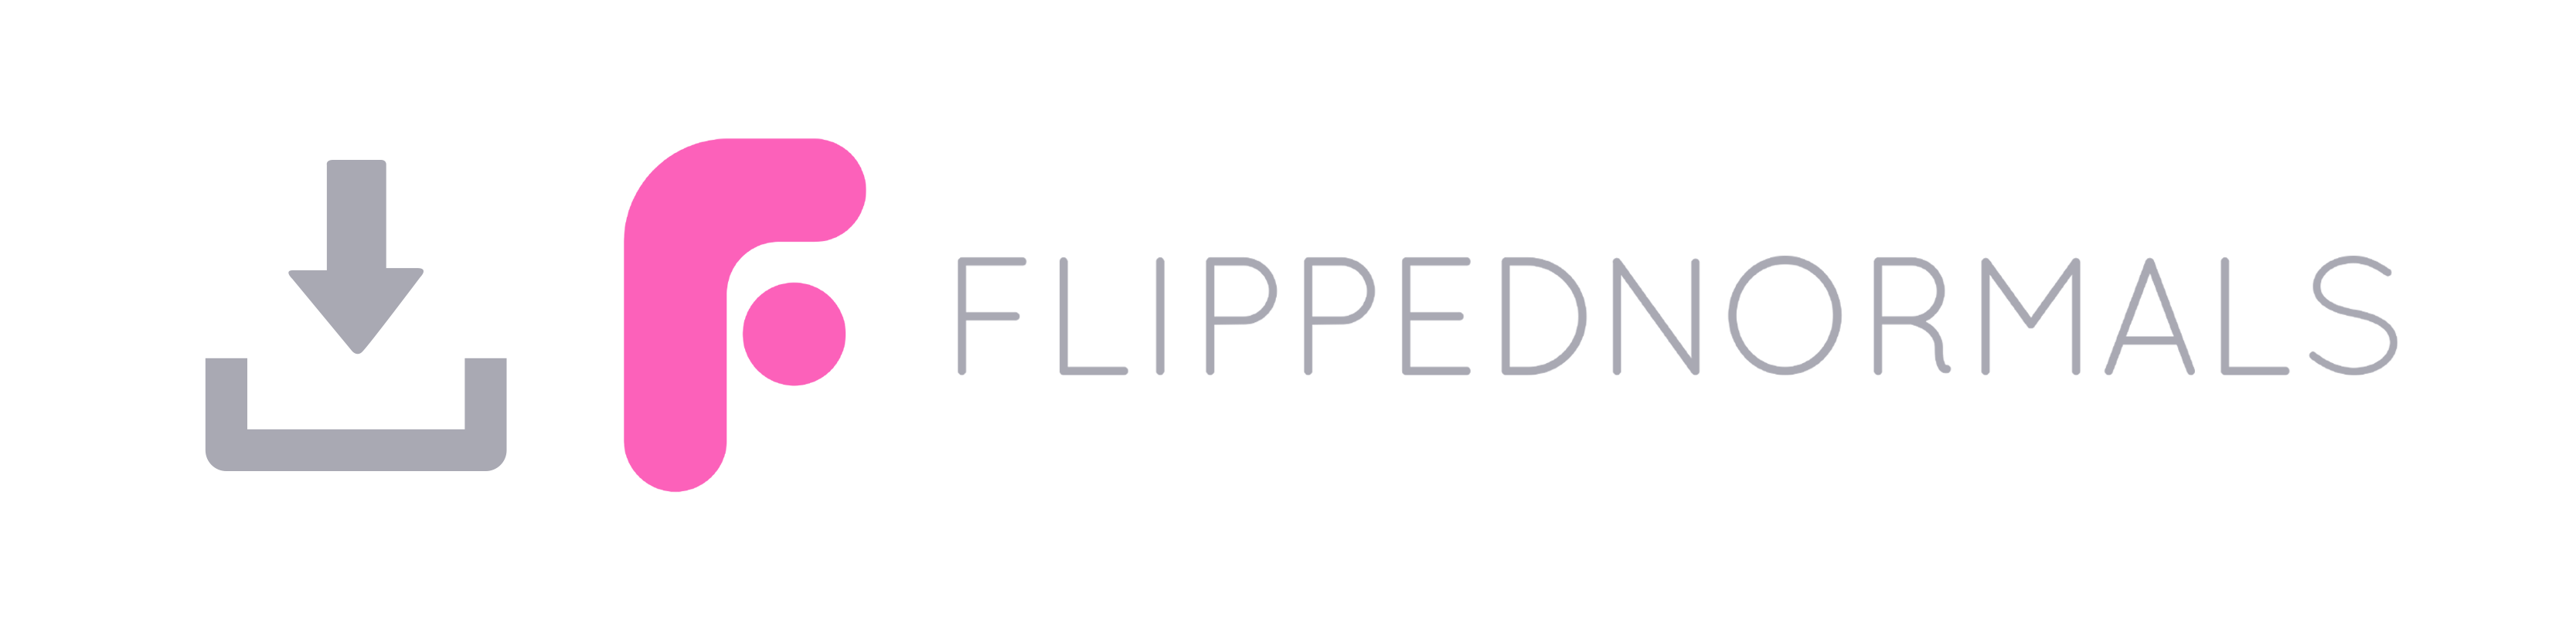 Flipped Normals